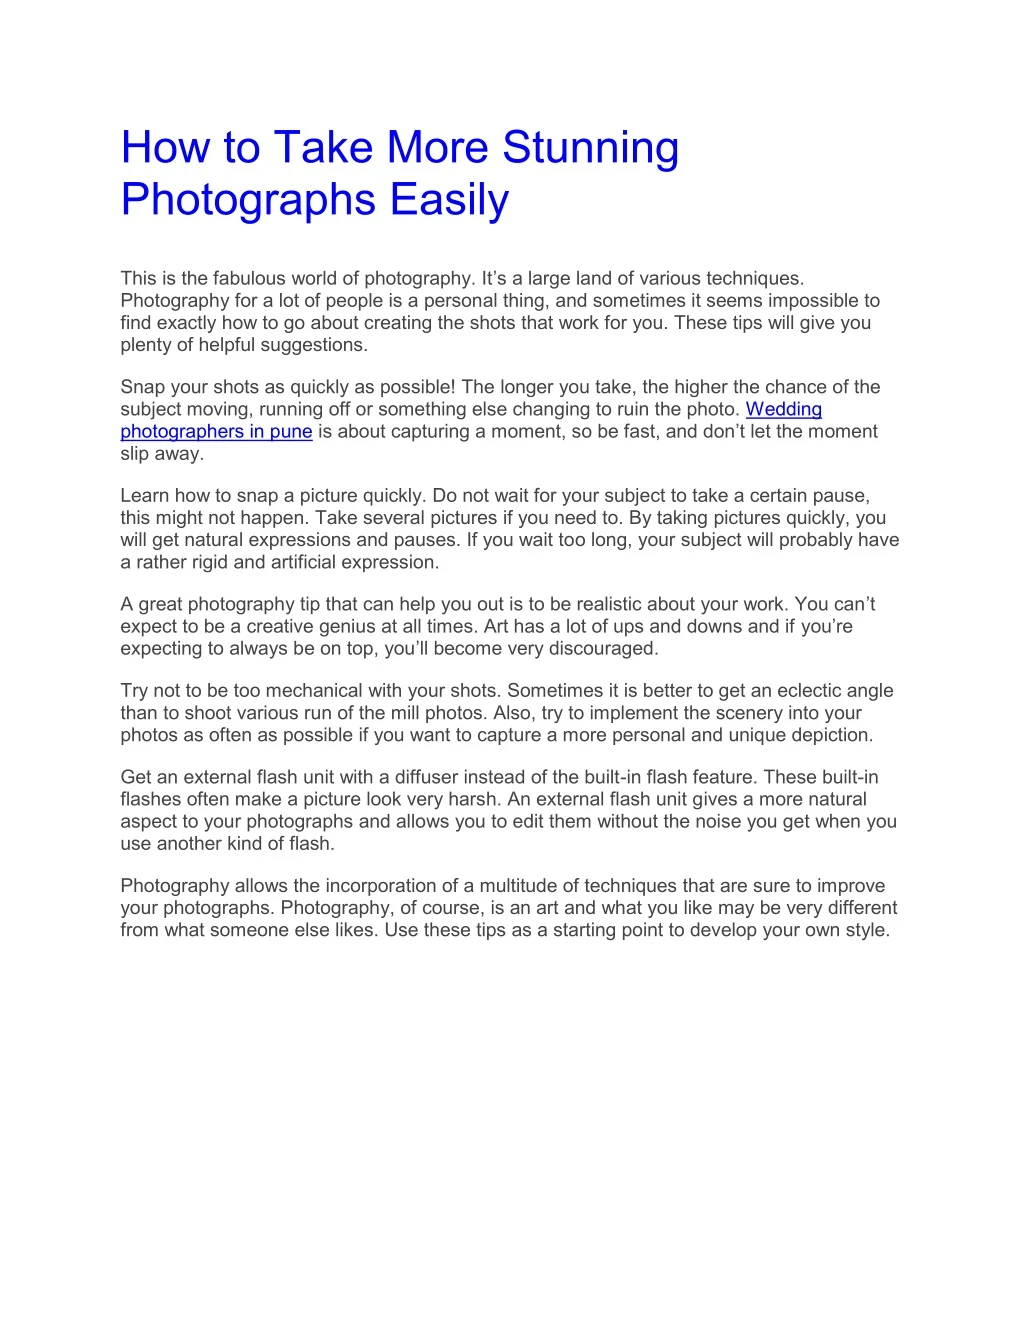 how to take more stunning photographs easily